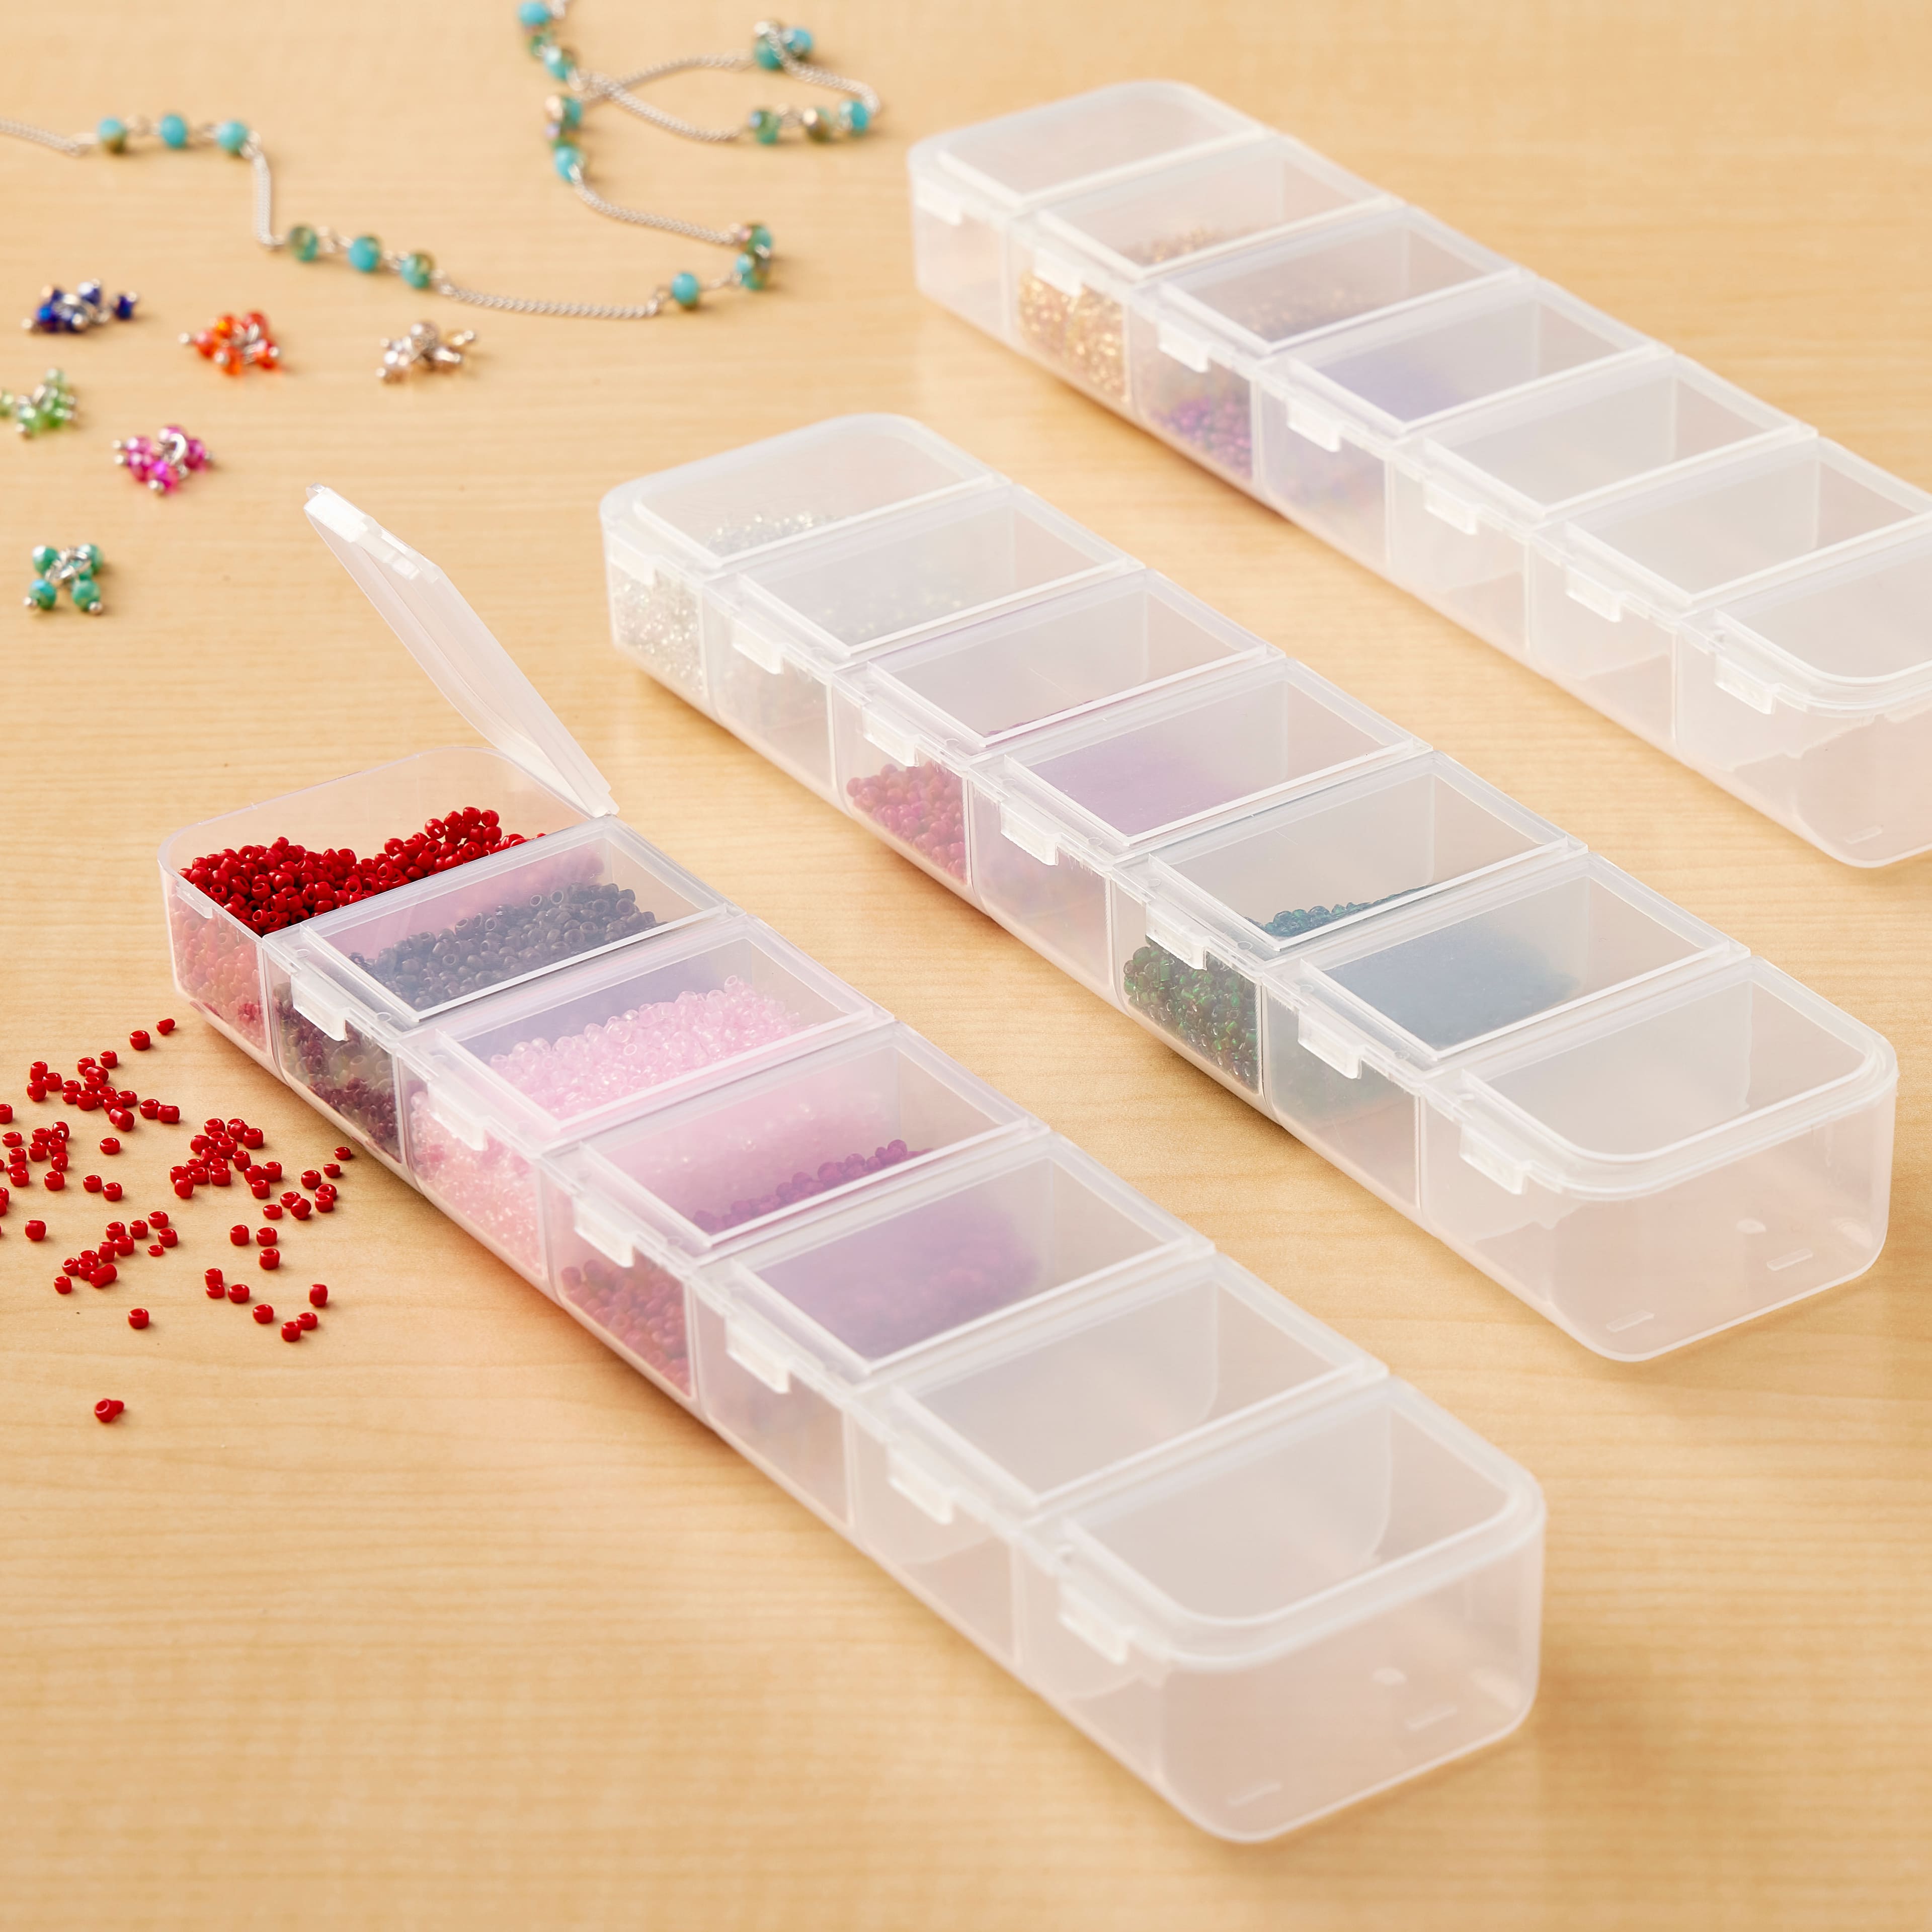 Clear 7-Compartment Jewellery Storage Boxes, 3ct. by Bead Landing